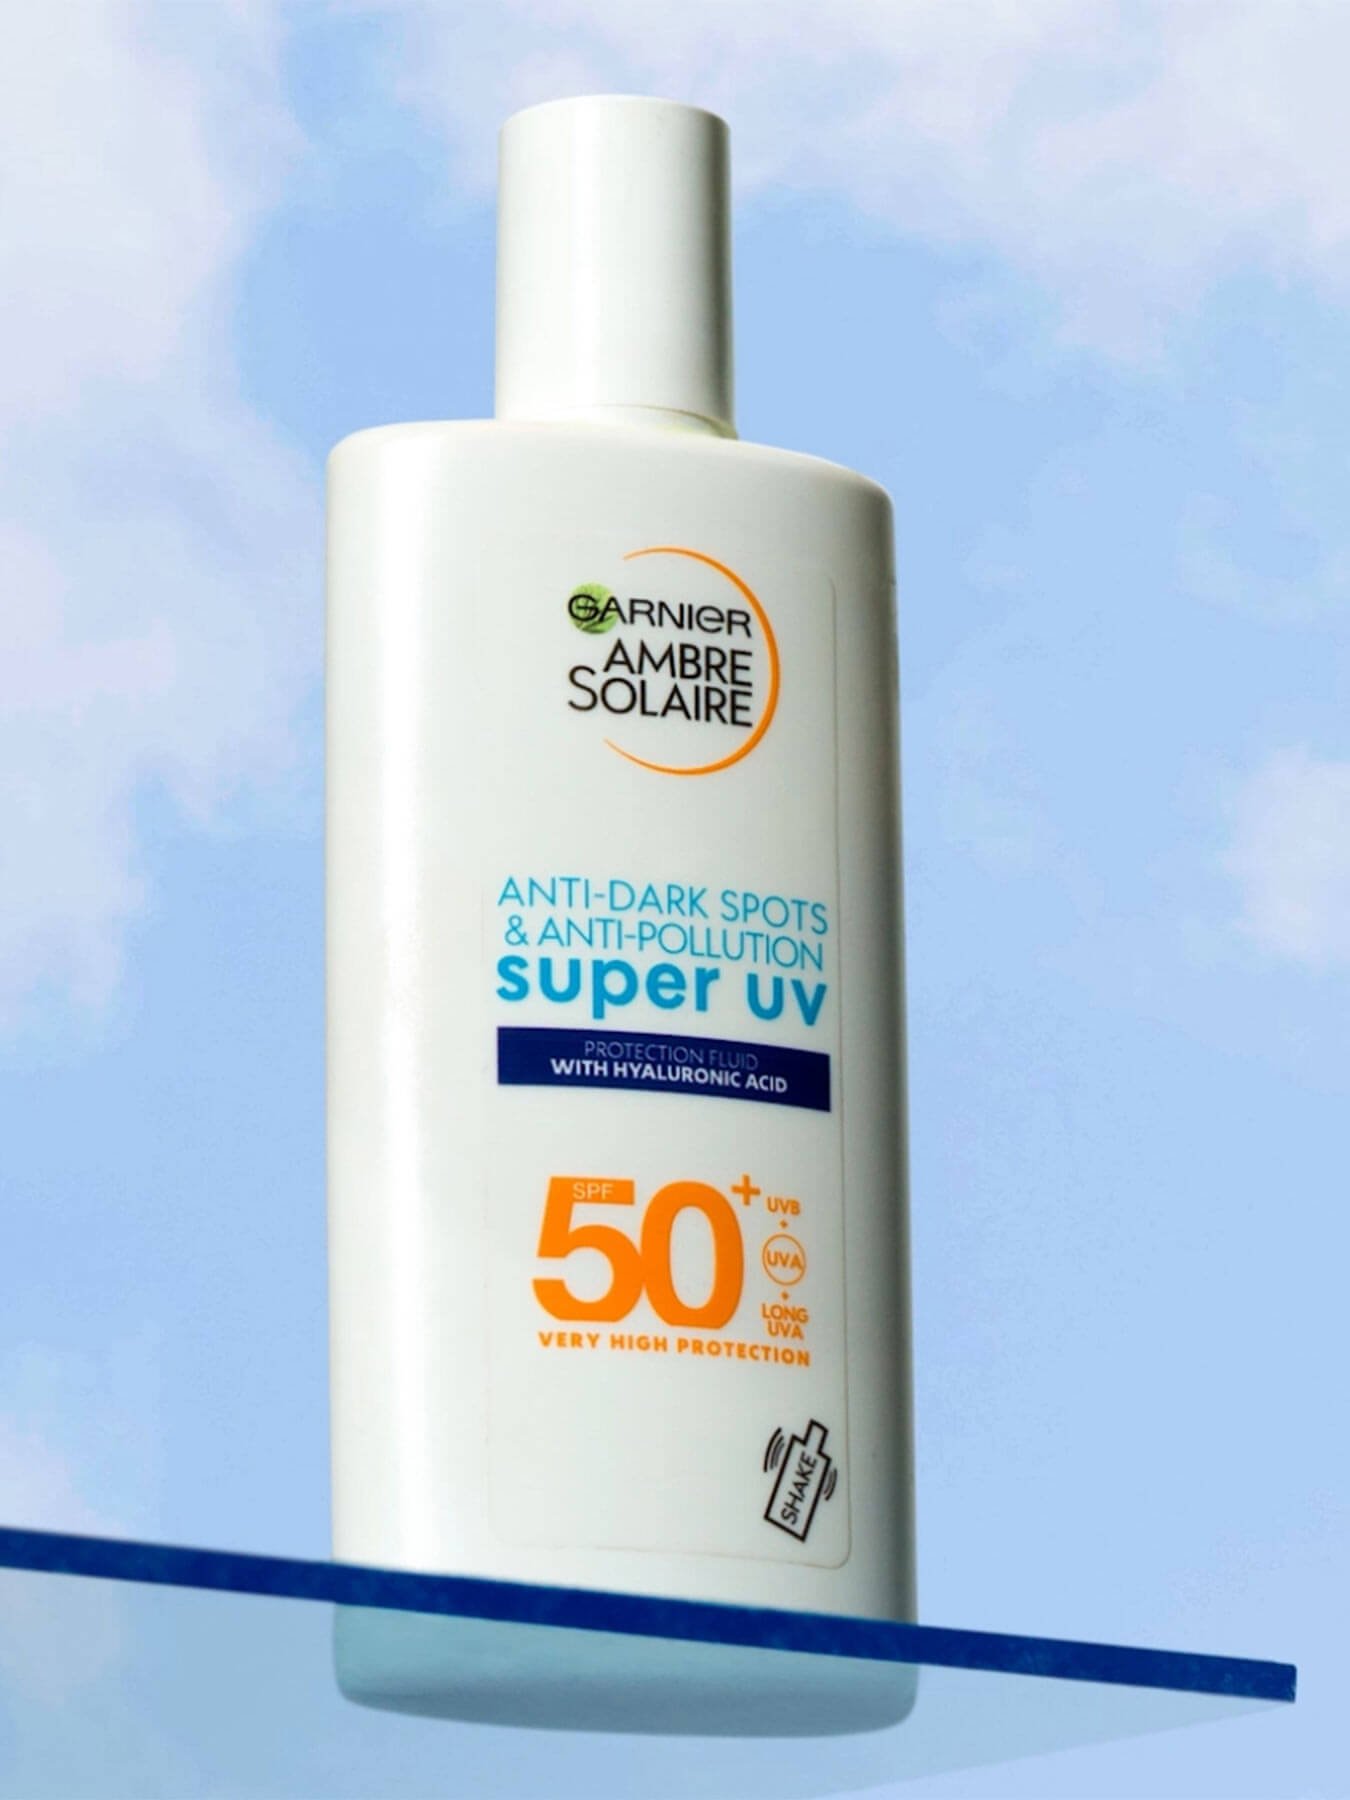 Super UV Ambre Solaire Face Fluid packshot outside with sky background